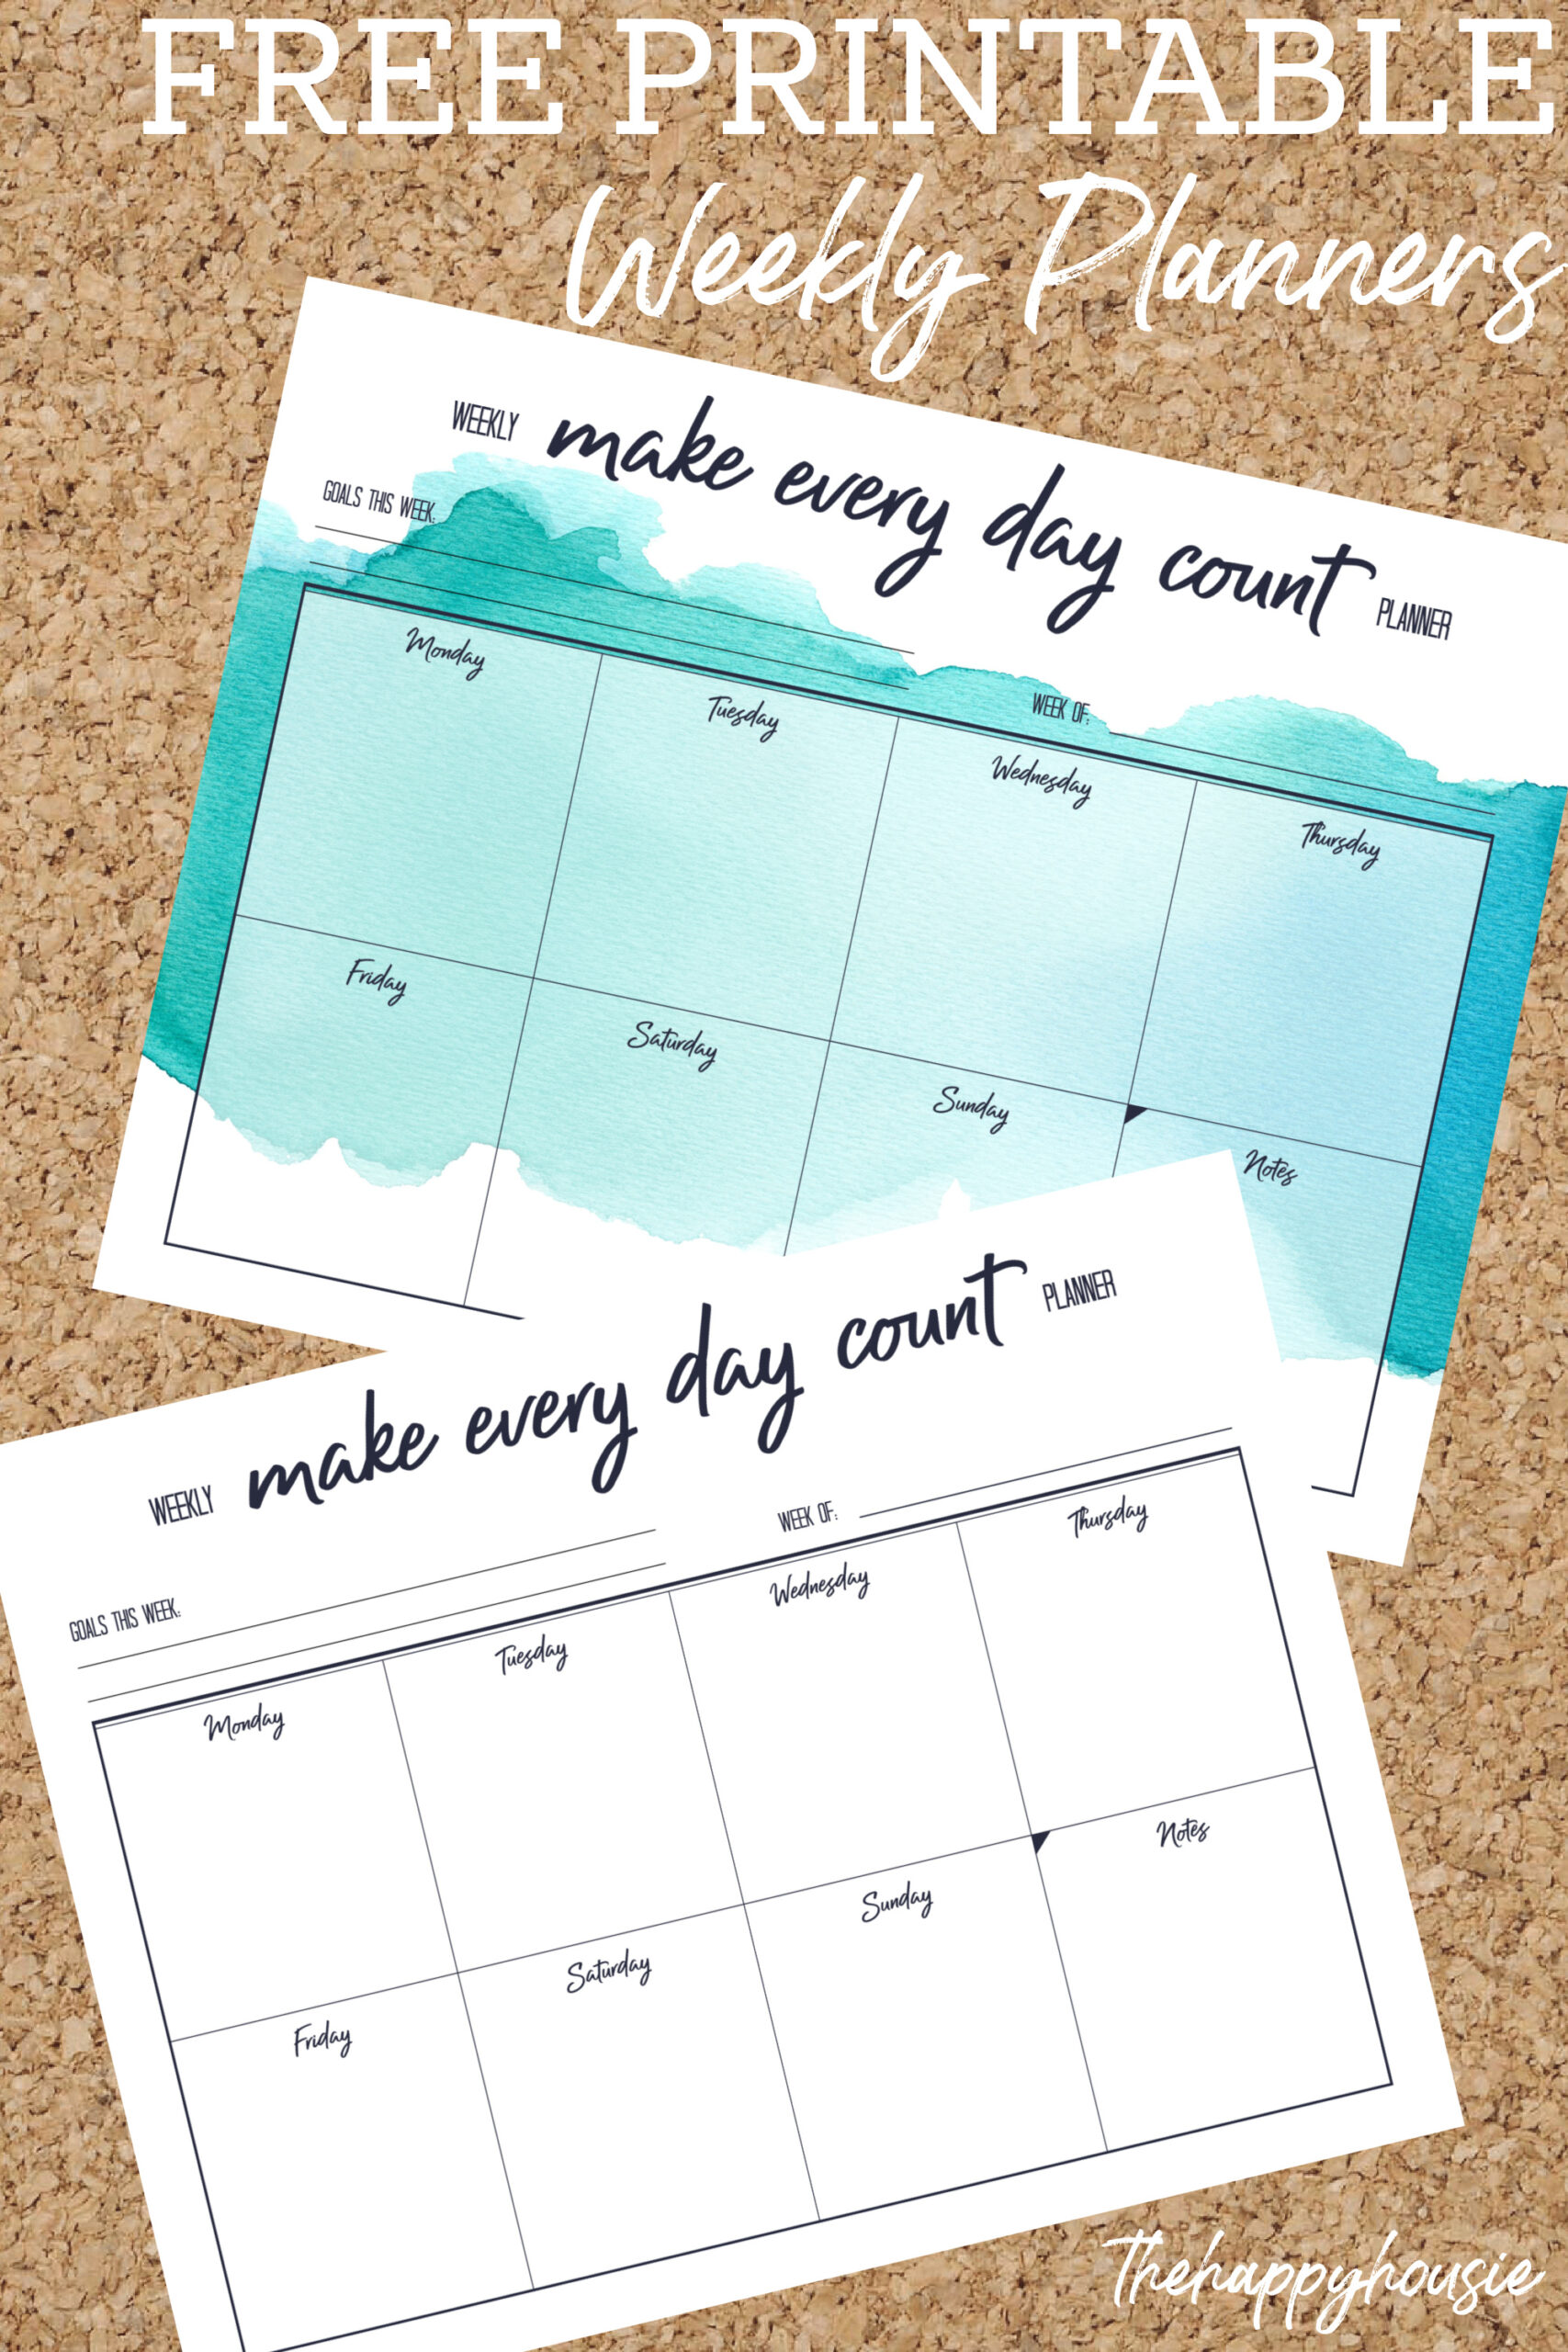 free printable weekly planners on a cork board background